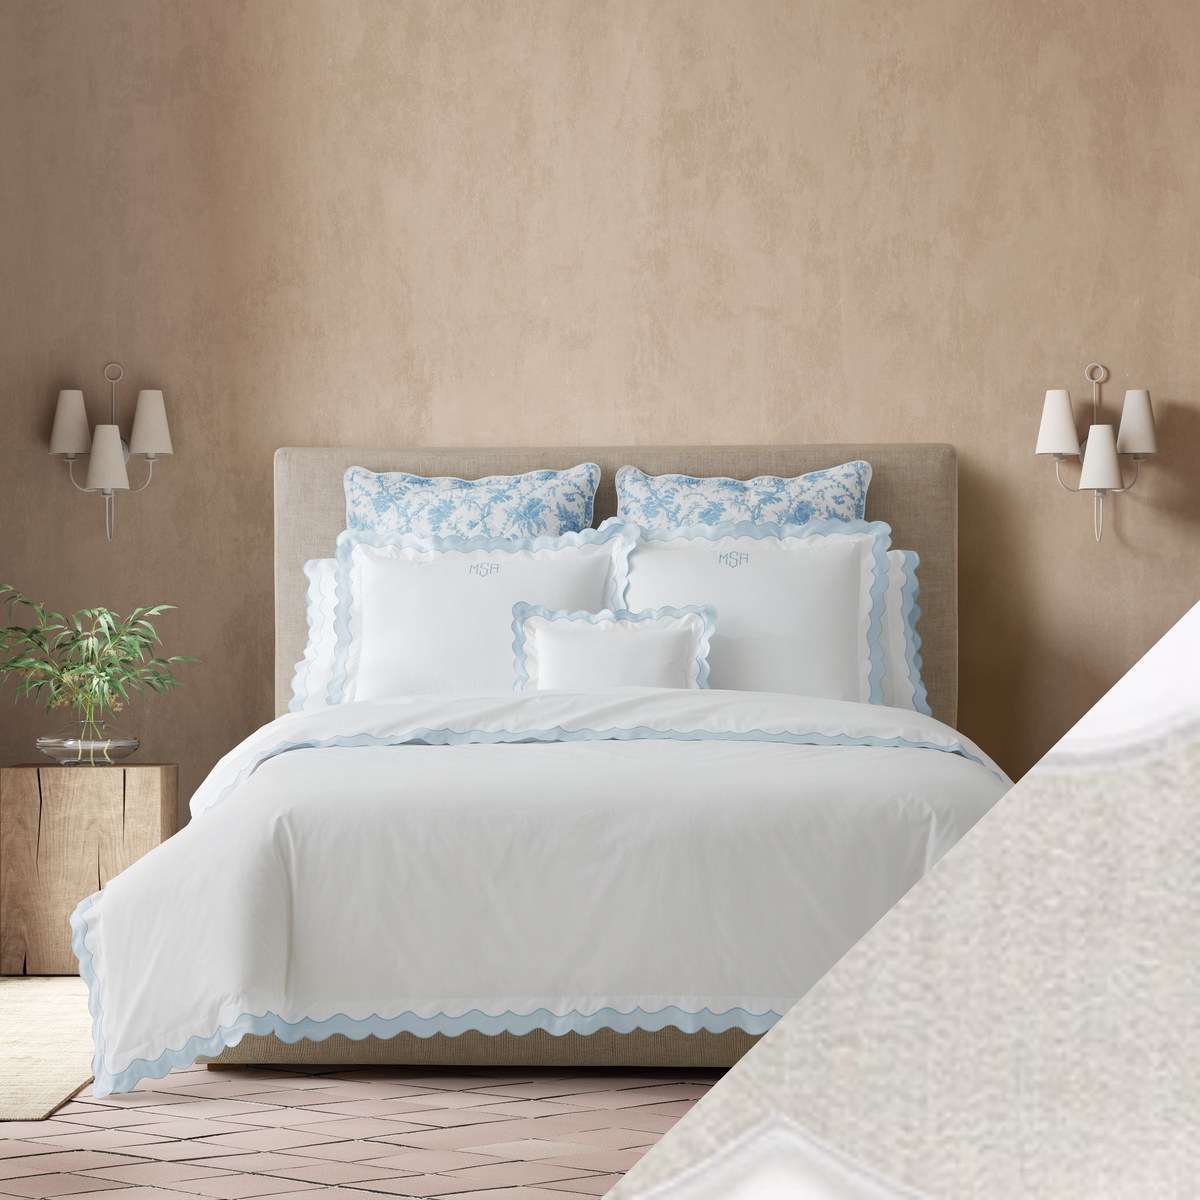 Full Bed Dressed in Matouk Lorelei Bedding in Blue Color with Silver Swatch